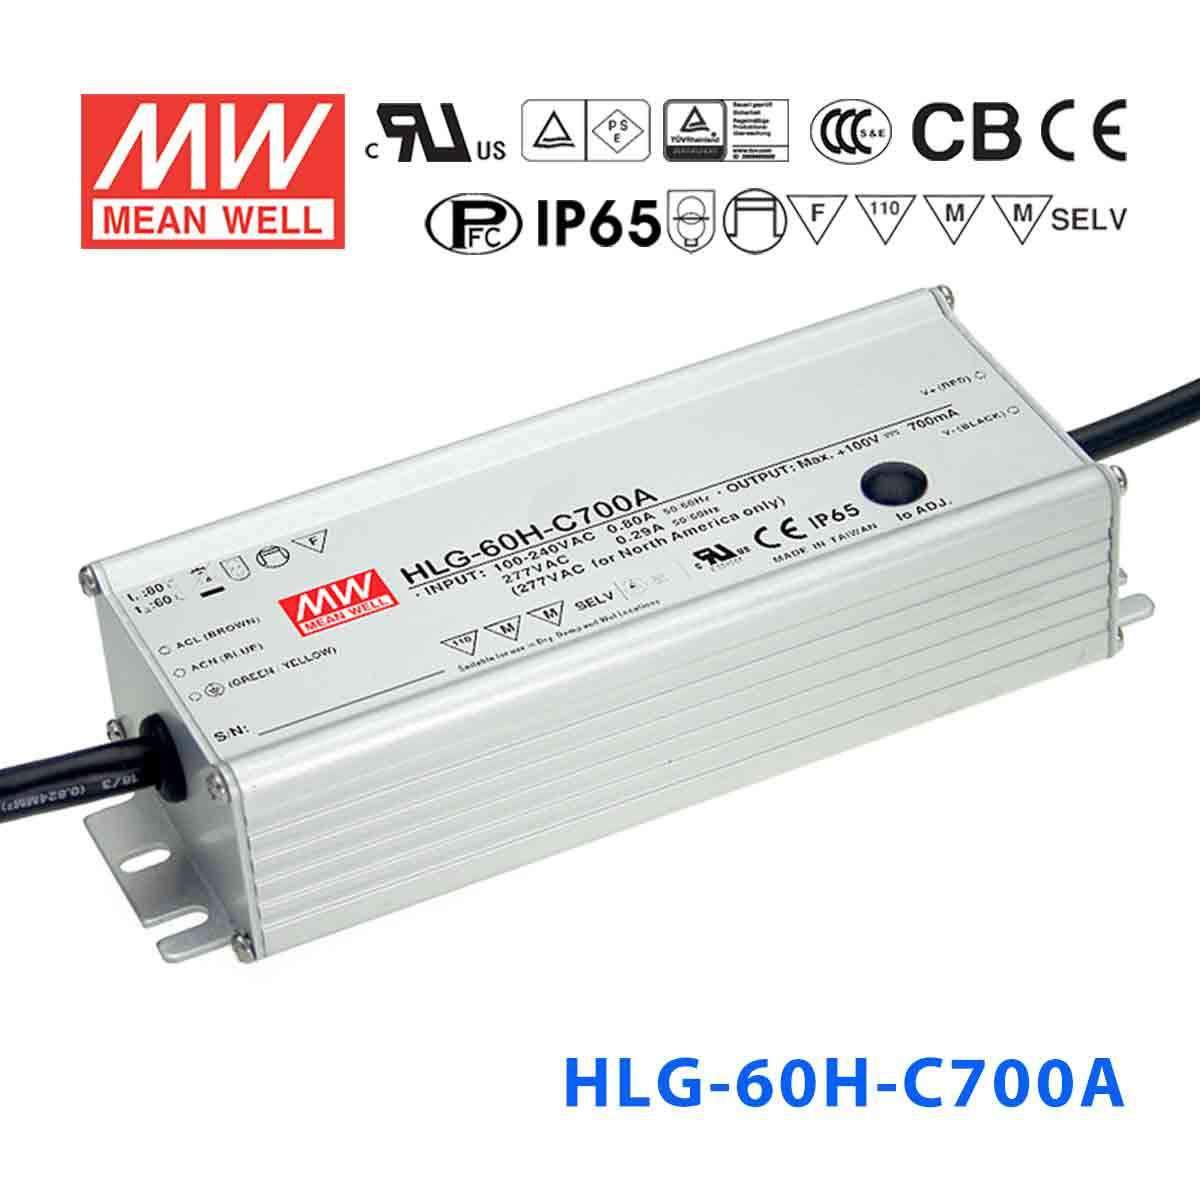 Mean Well HLG-60H-C700A Power Supply 70W 700mA - Adjustable